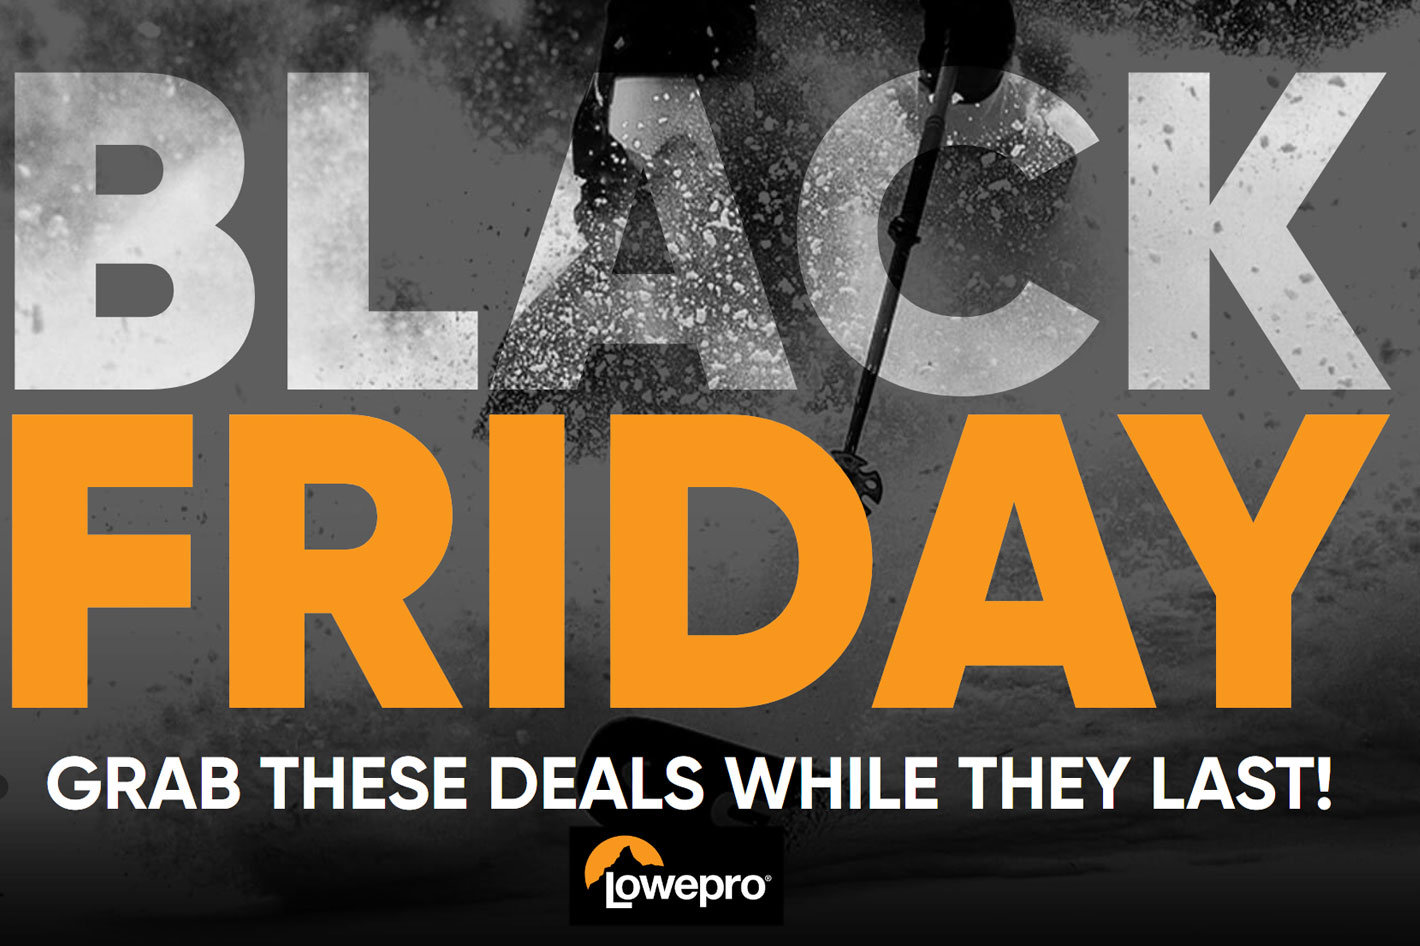 PVC’s Black Friday 2021 best deals: look at the bargains we found